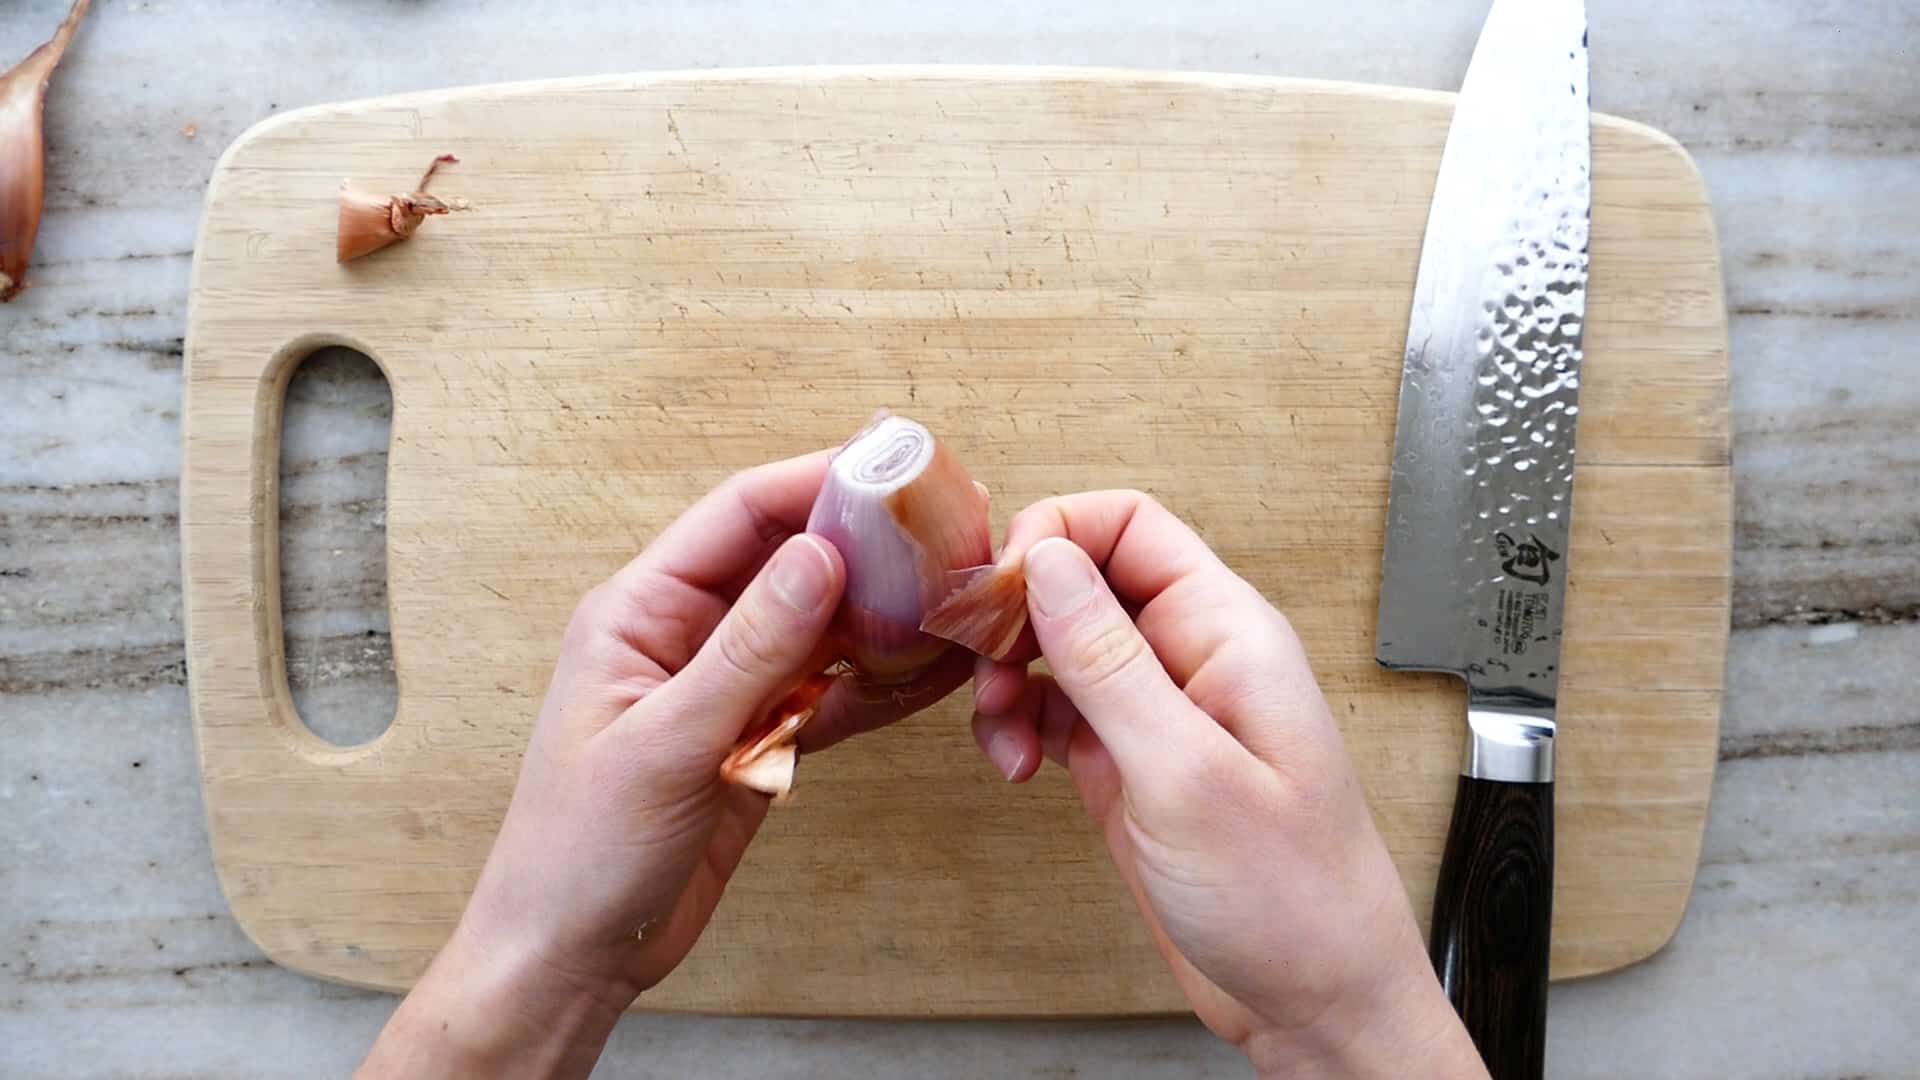 the hands of a woman peeling a shallot over a cutting board on a counter